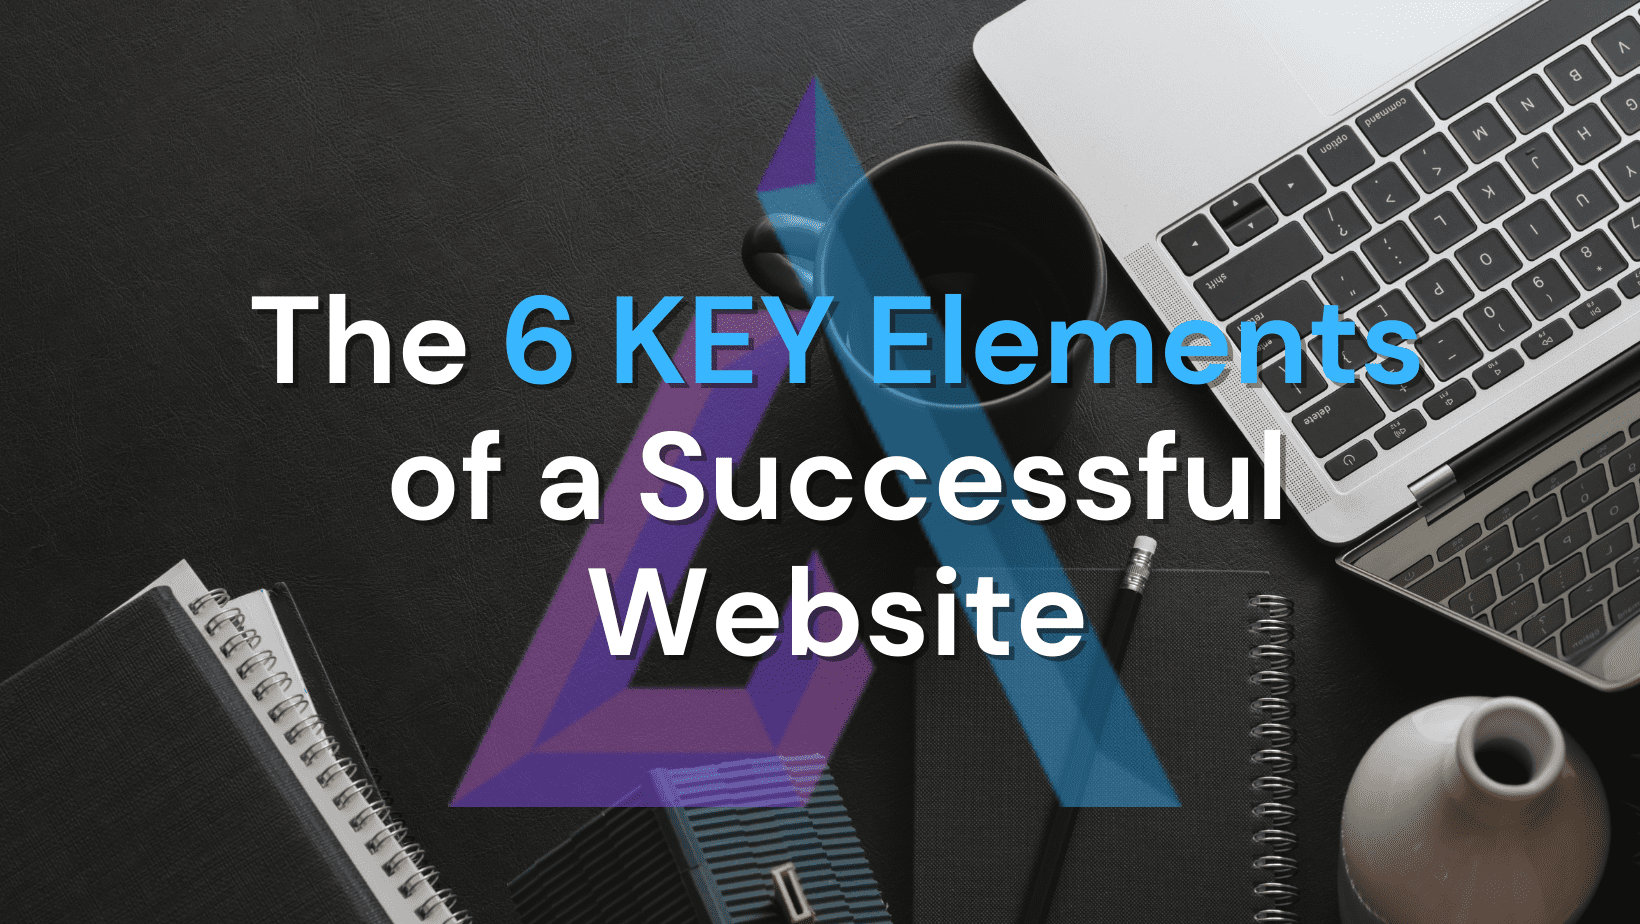 The 6 key elements of a successful business website